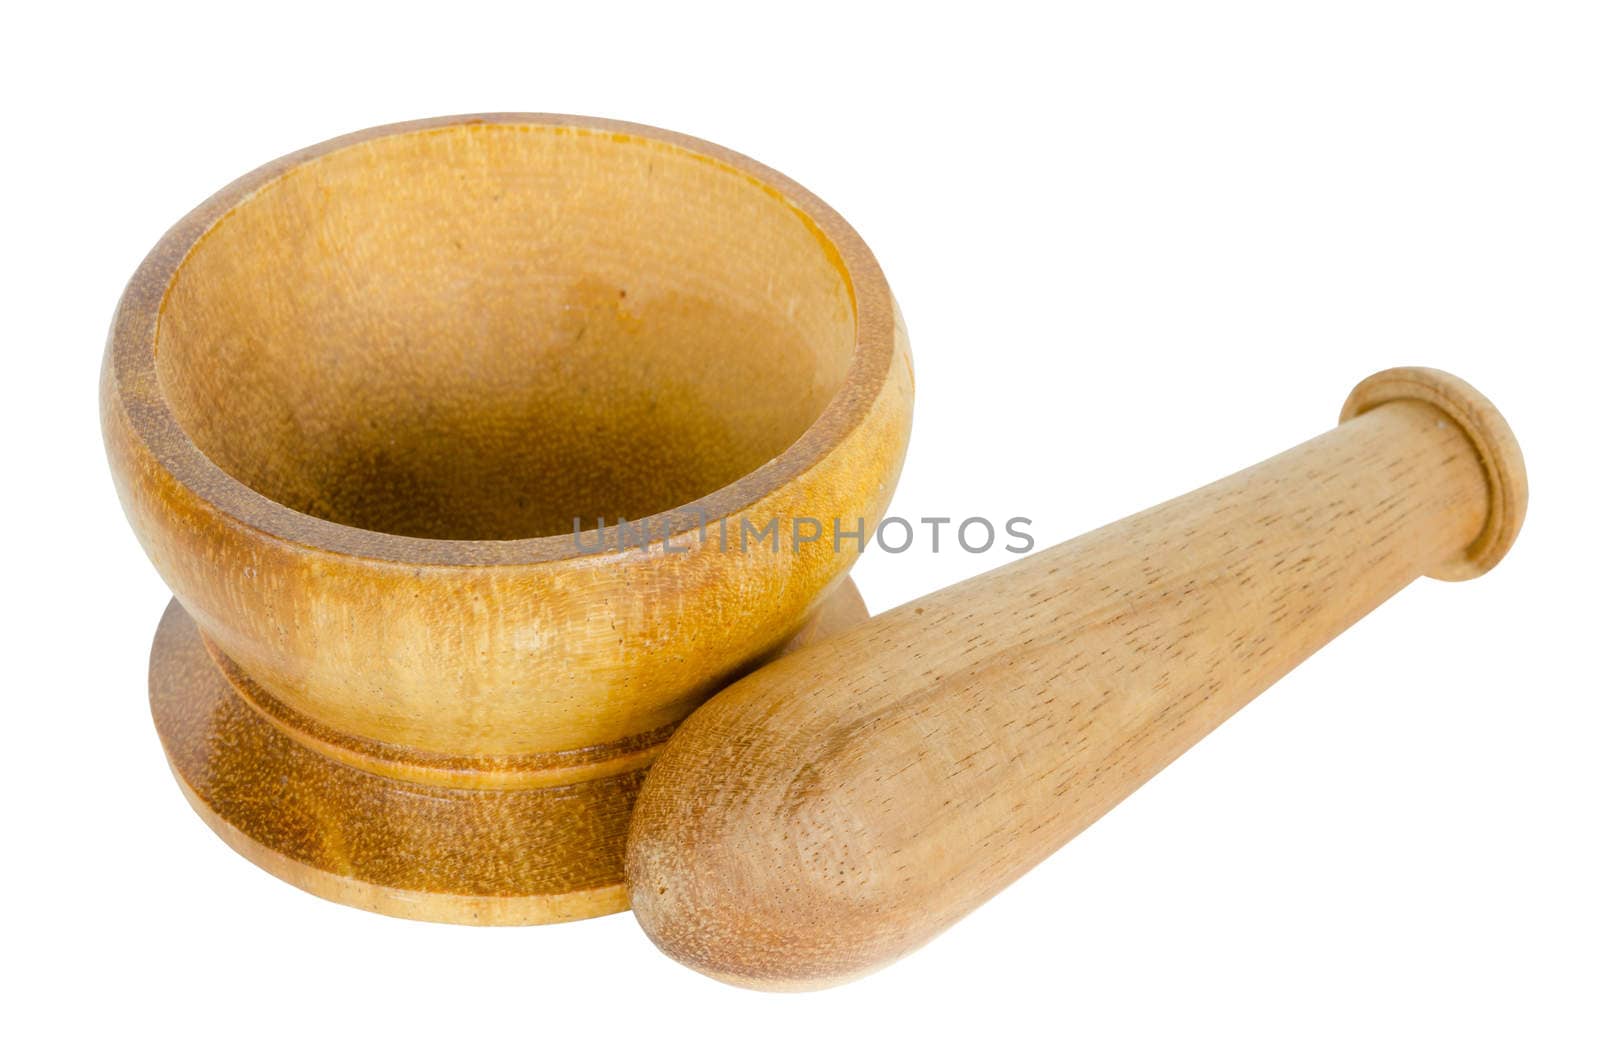 Wooden mortar on white background